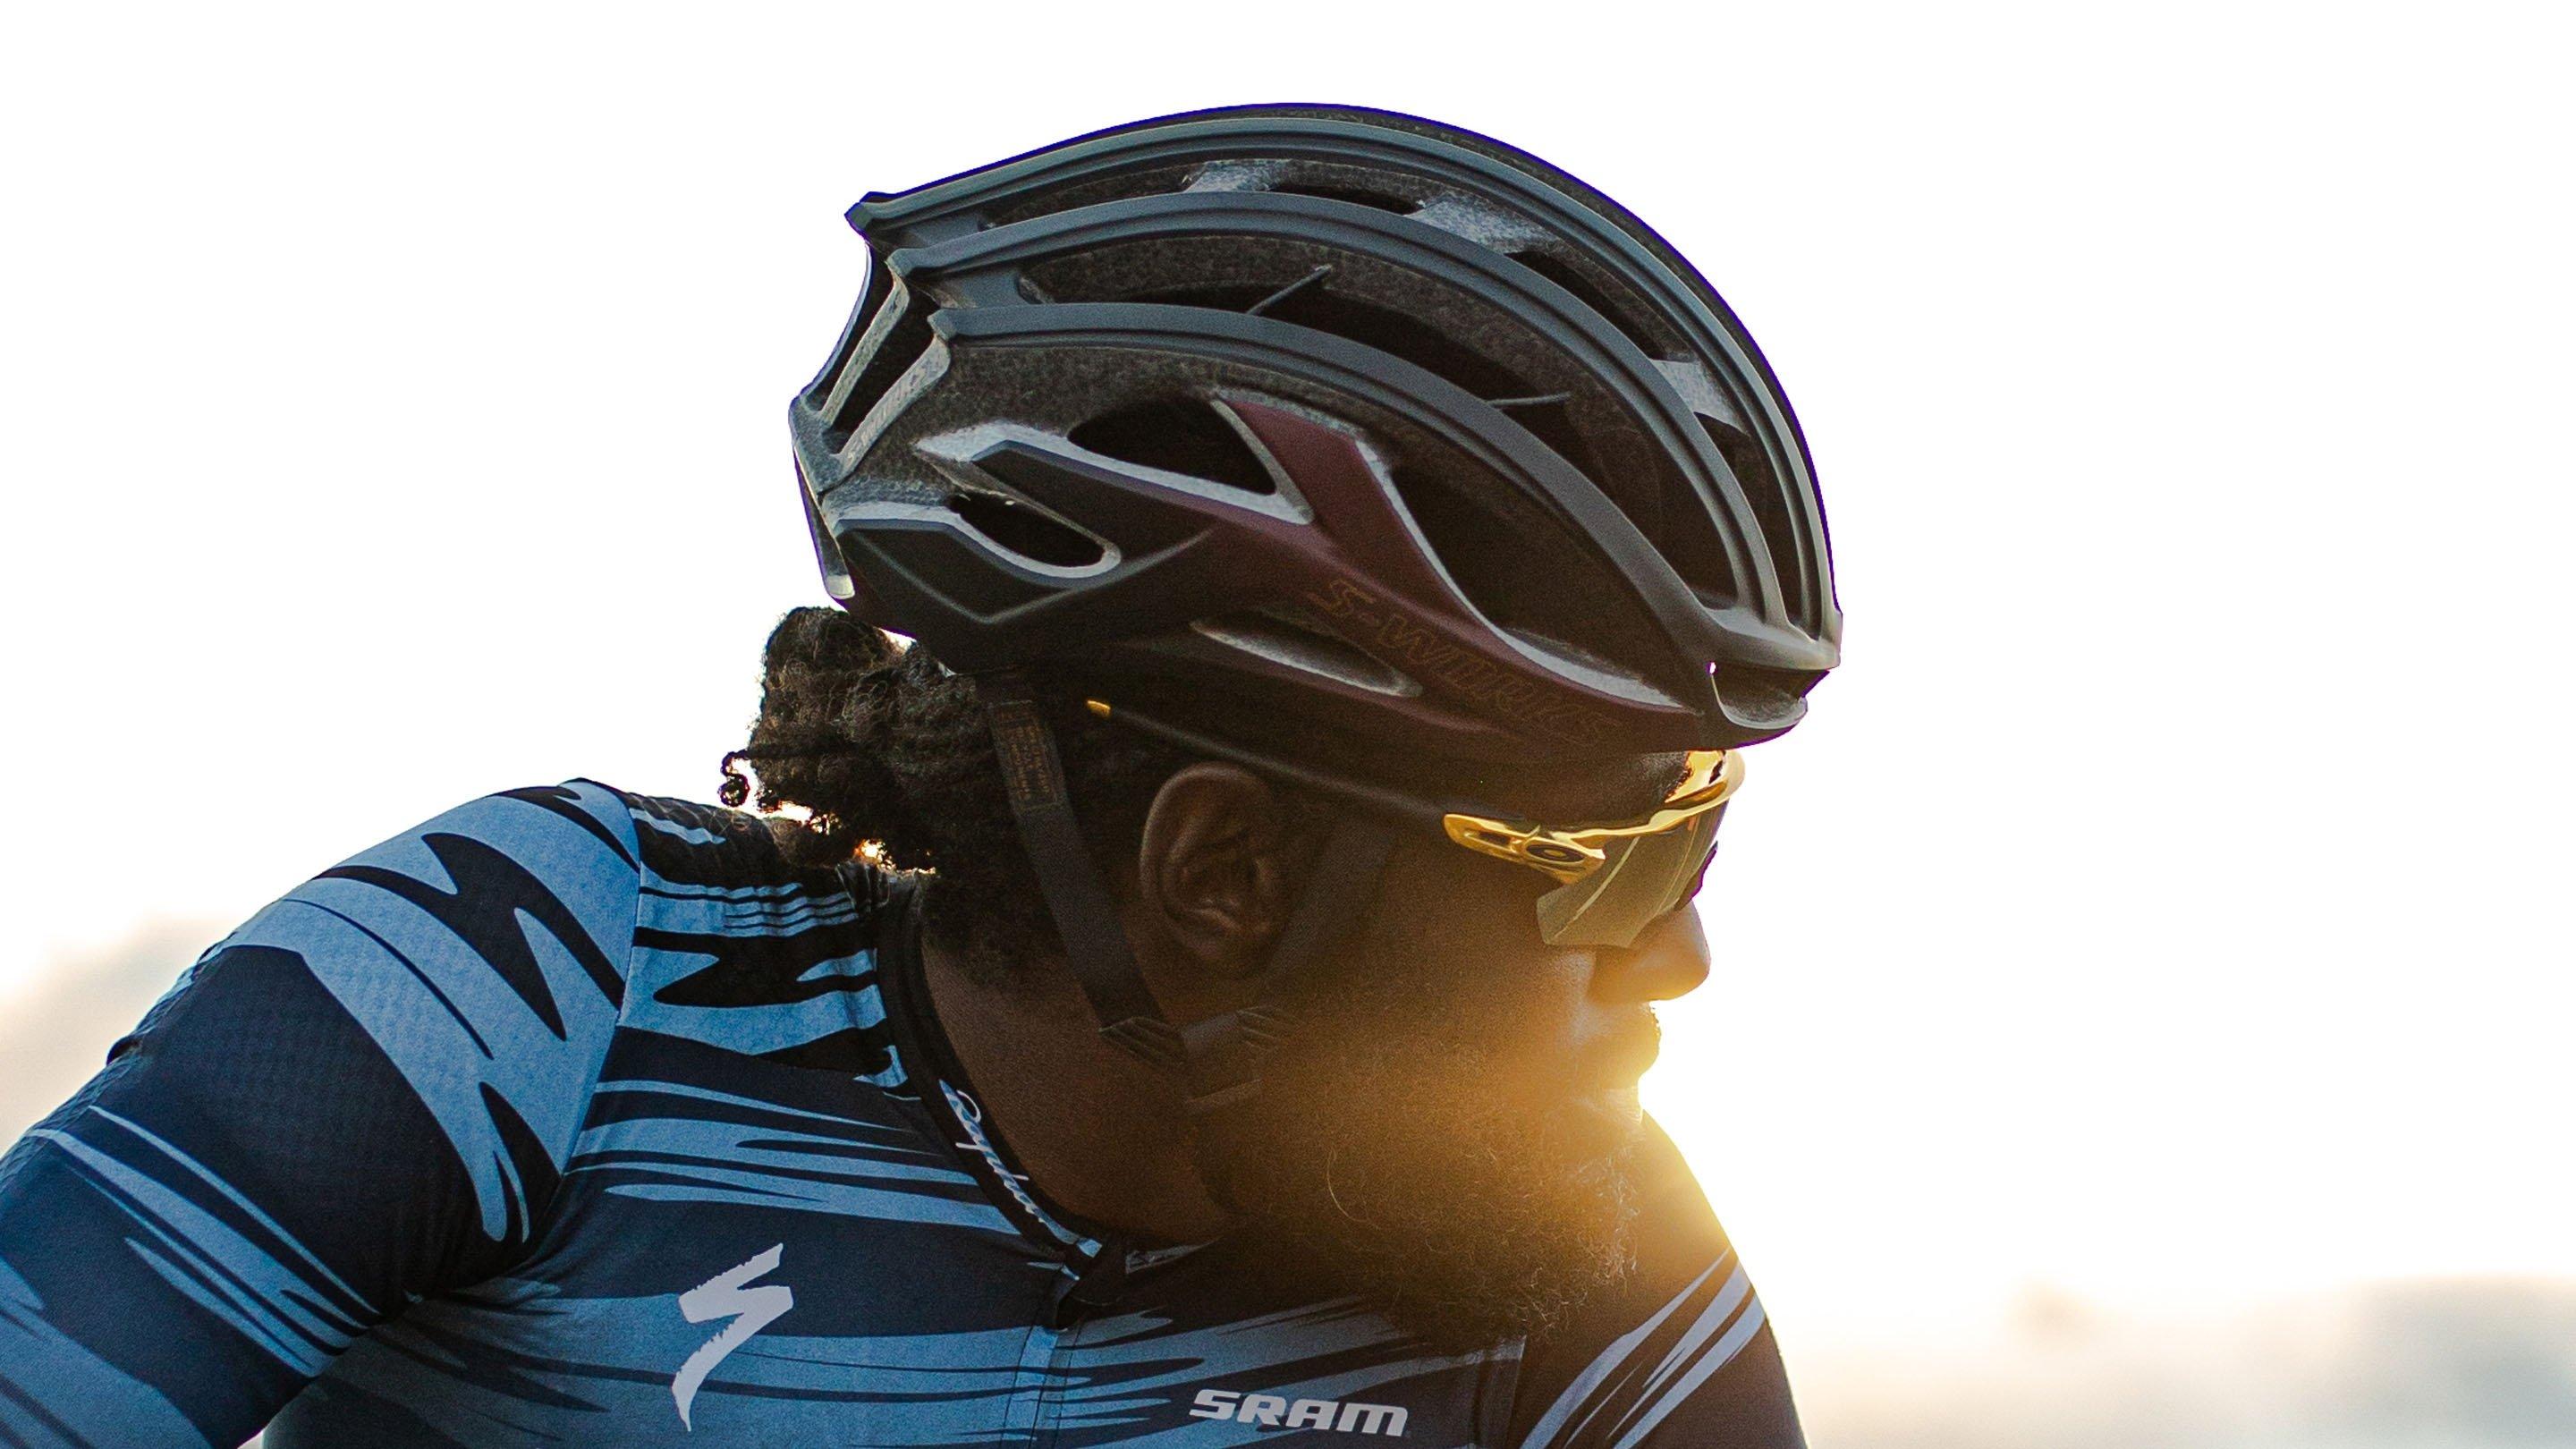 Casque SPECIALIZED S-Works Prevail II with ANGi - Down Under LTD